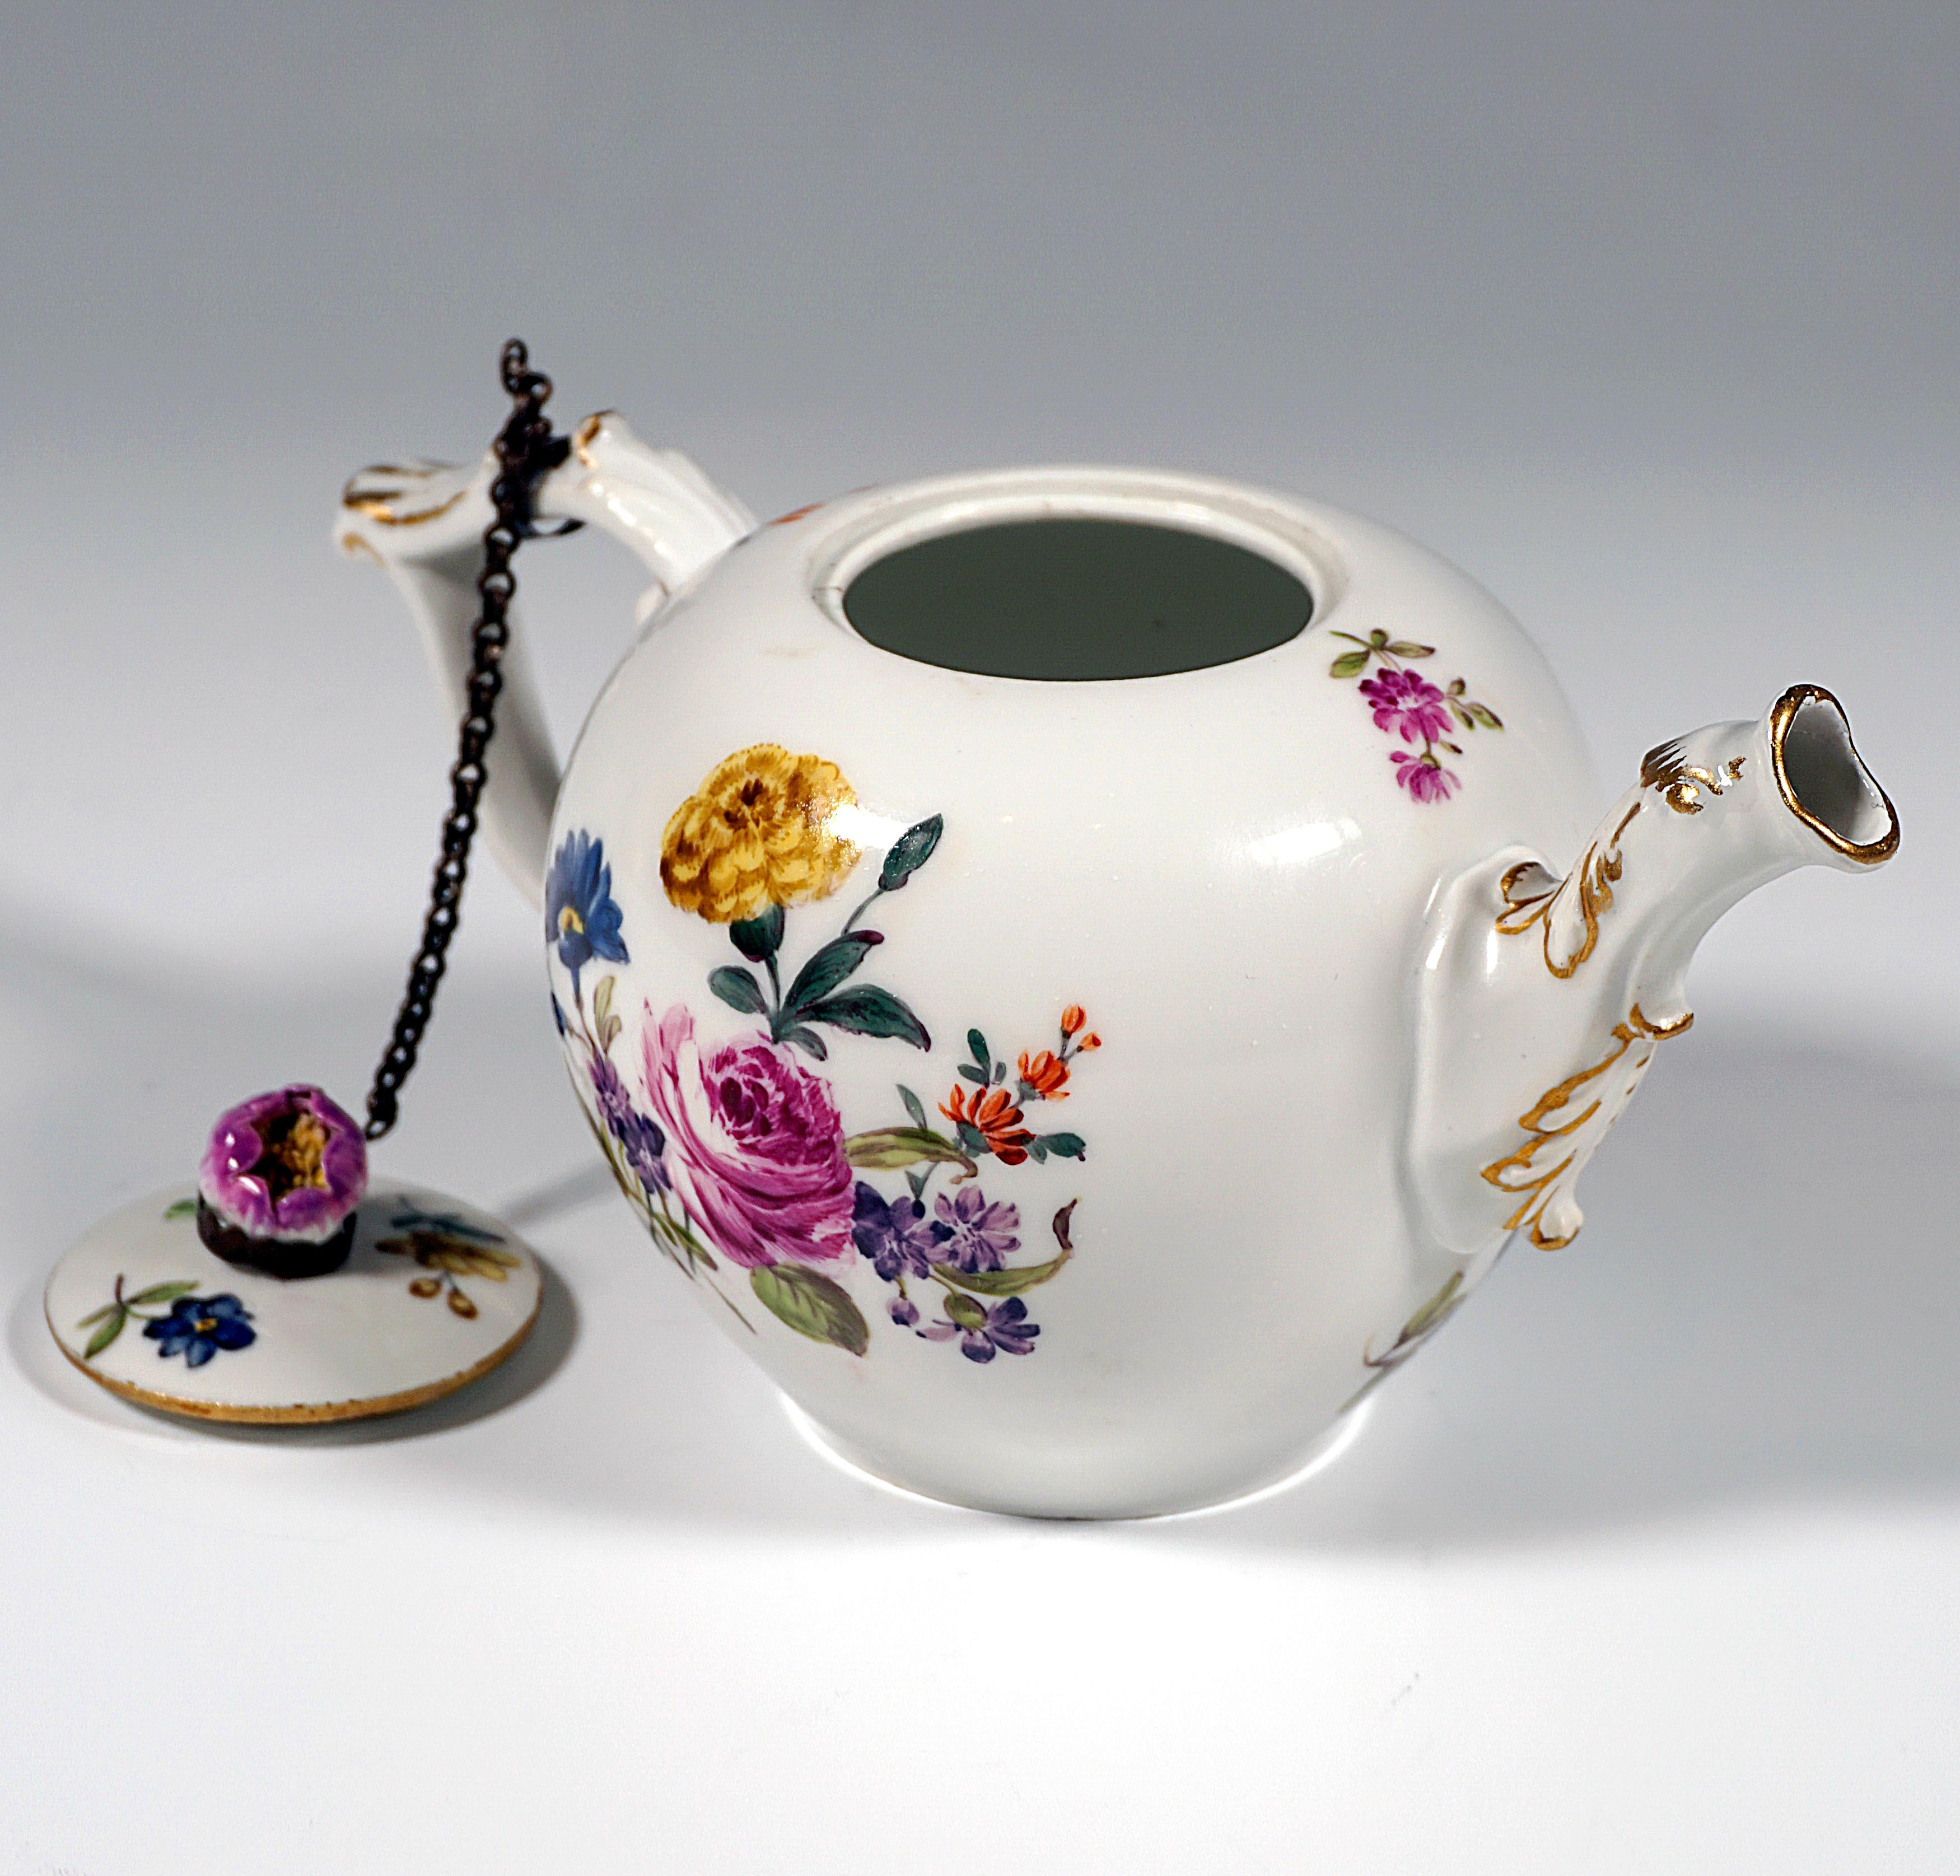 Hand-Painted Meissen Tea Pot with Flower Decoration, Rococo Period, circa 1750